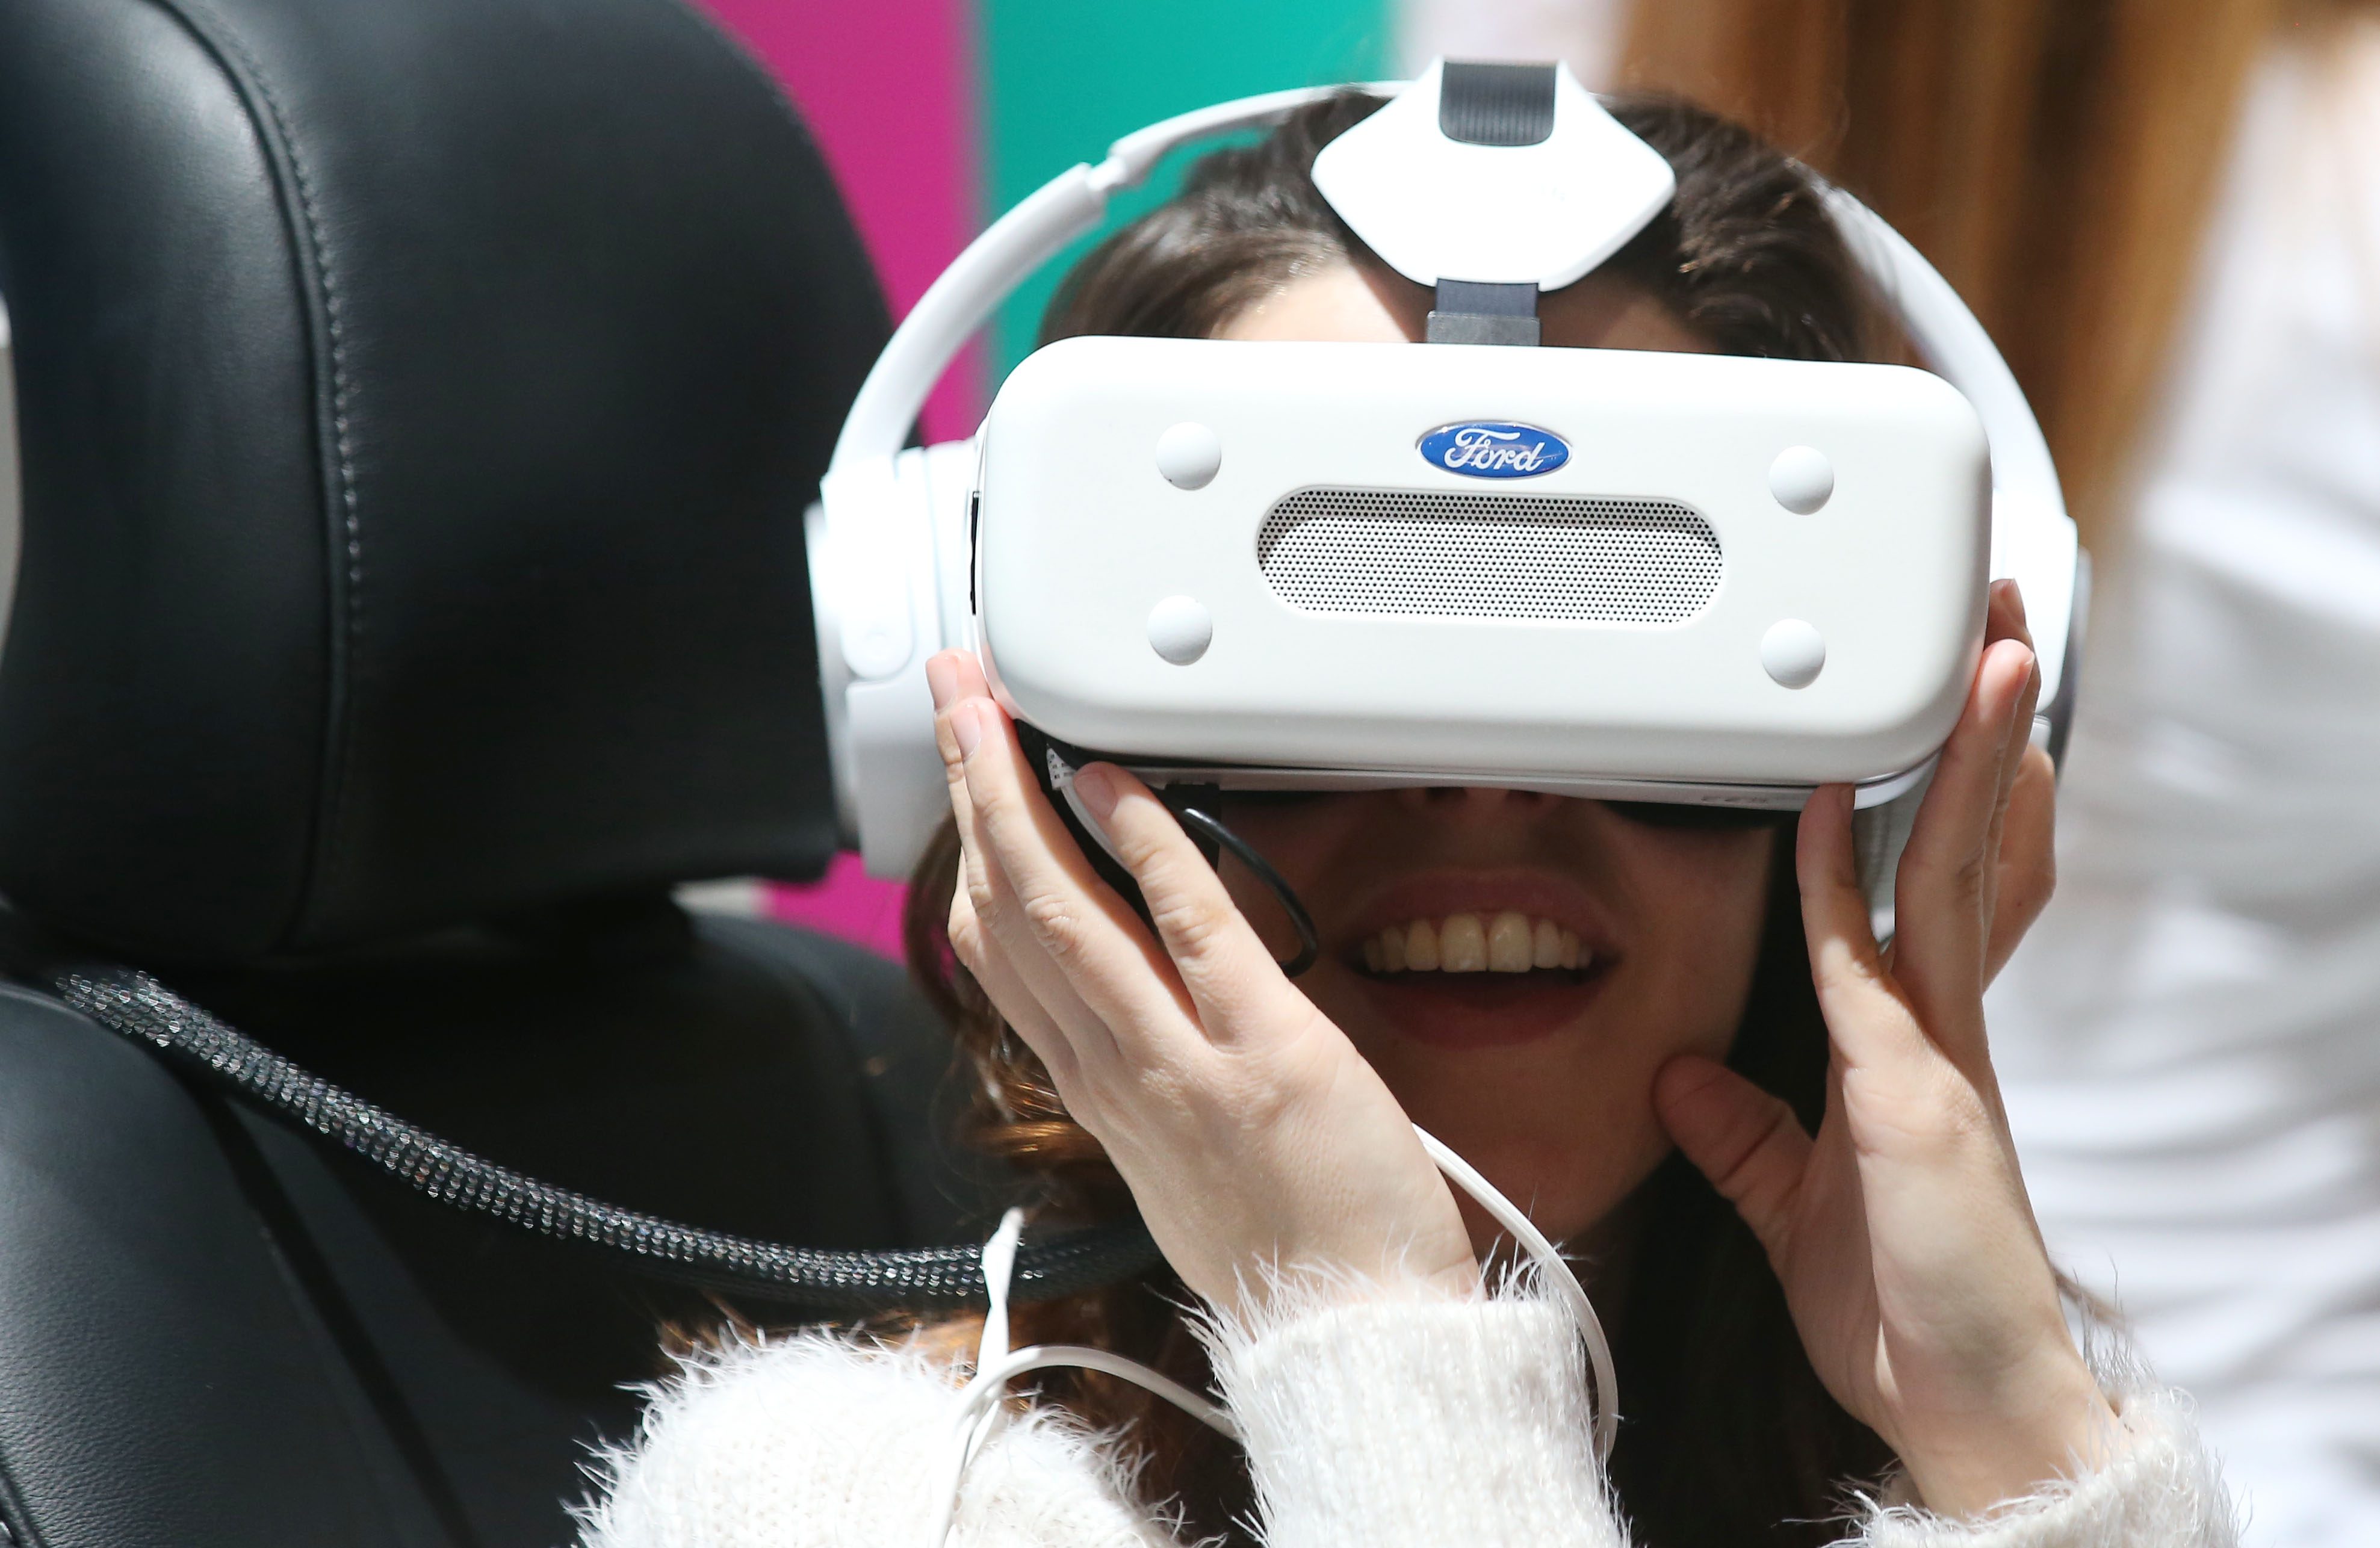 NEW EXPERIENCE. A woman uses a virtual reality device during the Mobile World Congress in Barcelona, Spain, February 23, 2016. Photo by Yonhap/EPA  